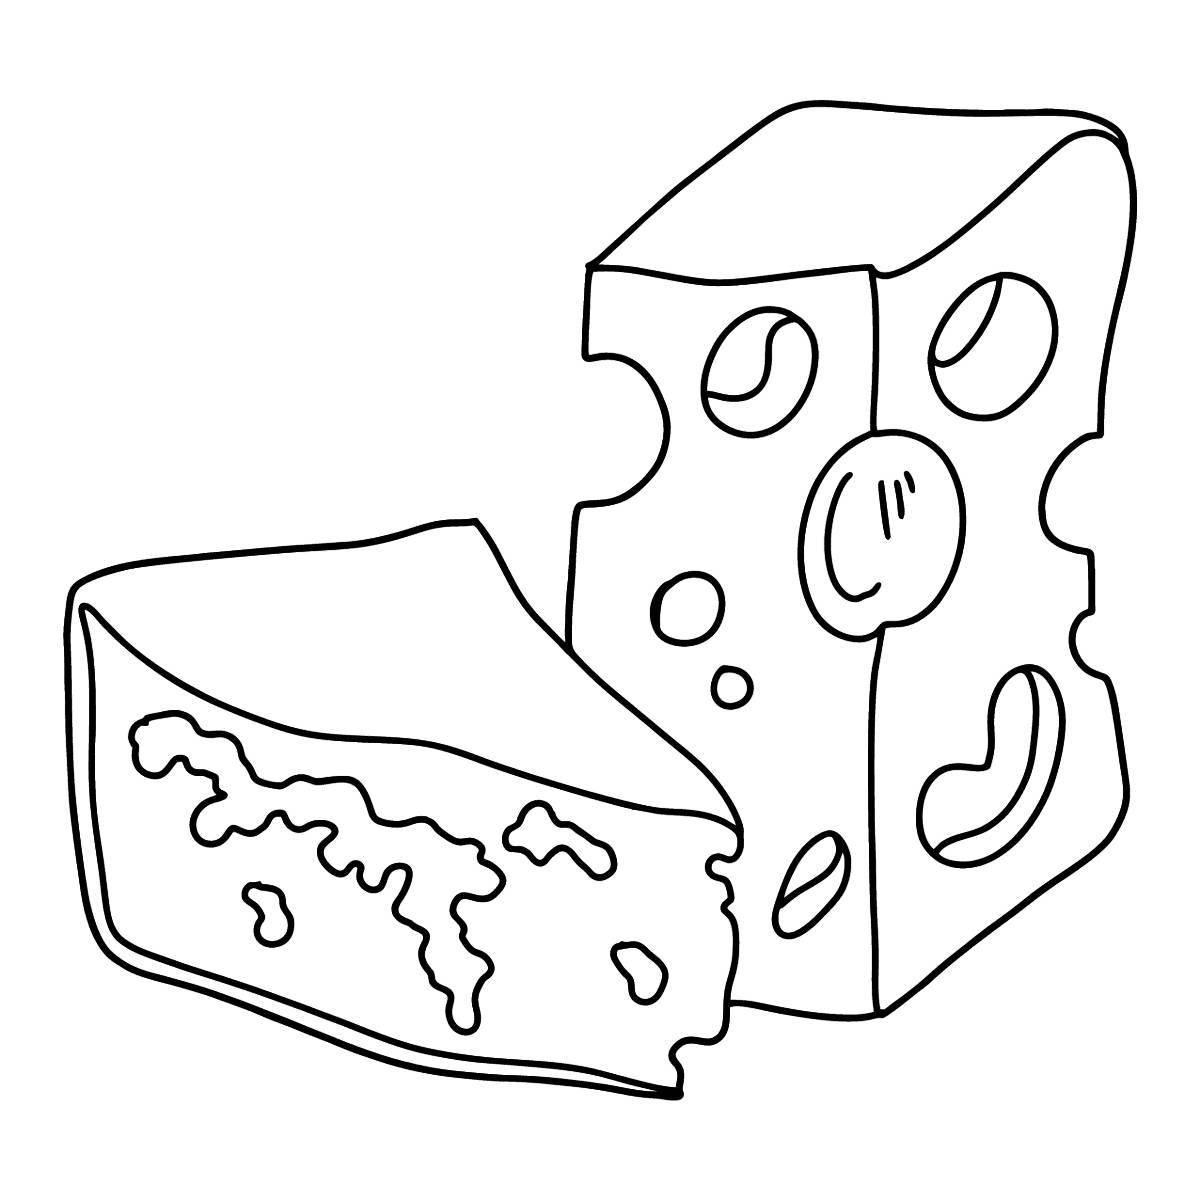 Bright cheese coloring page